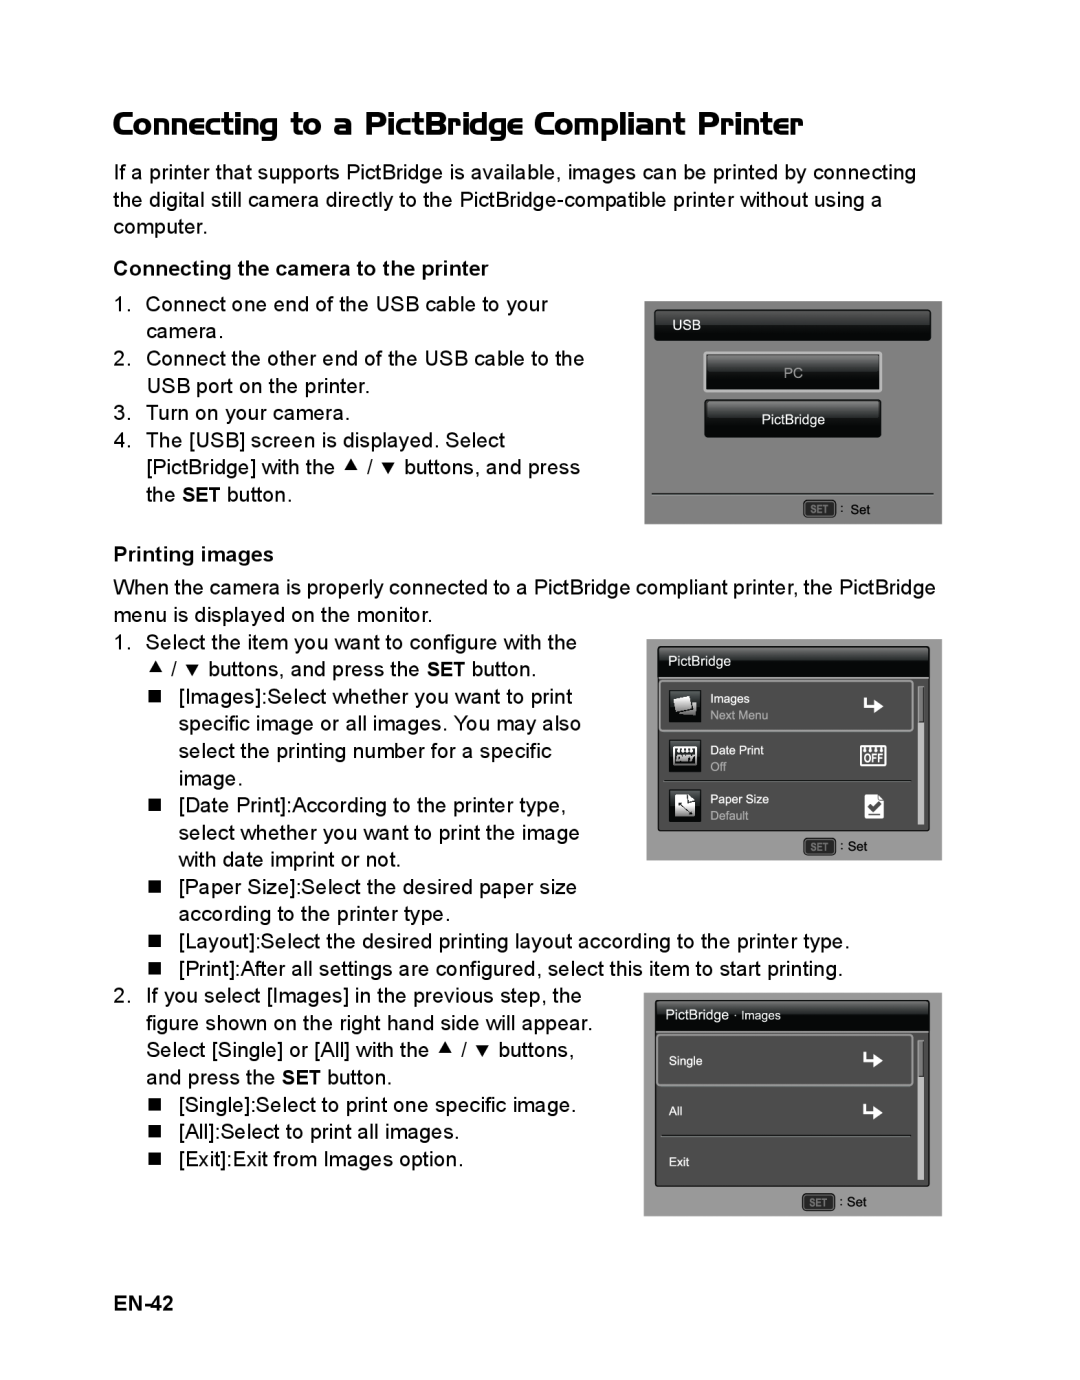 Sanyo VPC-S1415 Connecting to a PictBridge Compliant Printer, Connecting the camera to the printer, Printing images, EN-42 